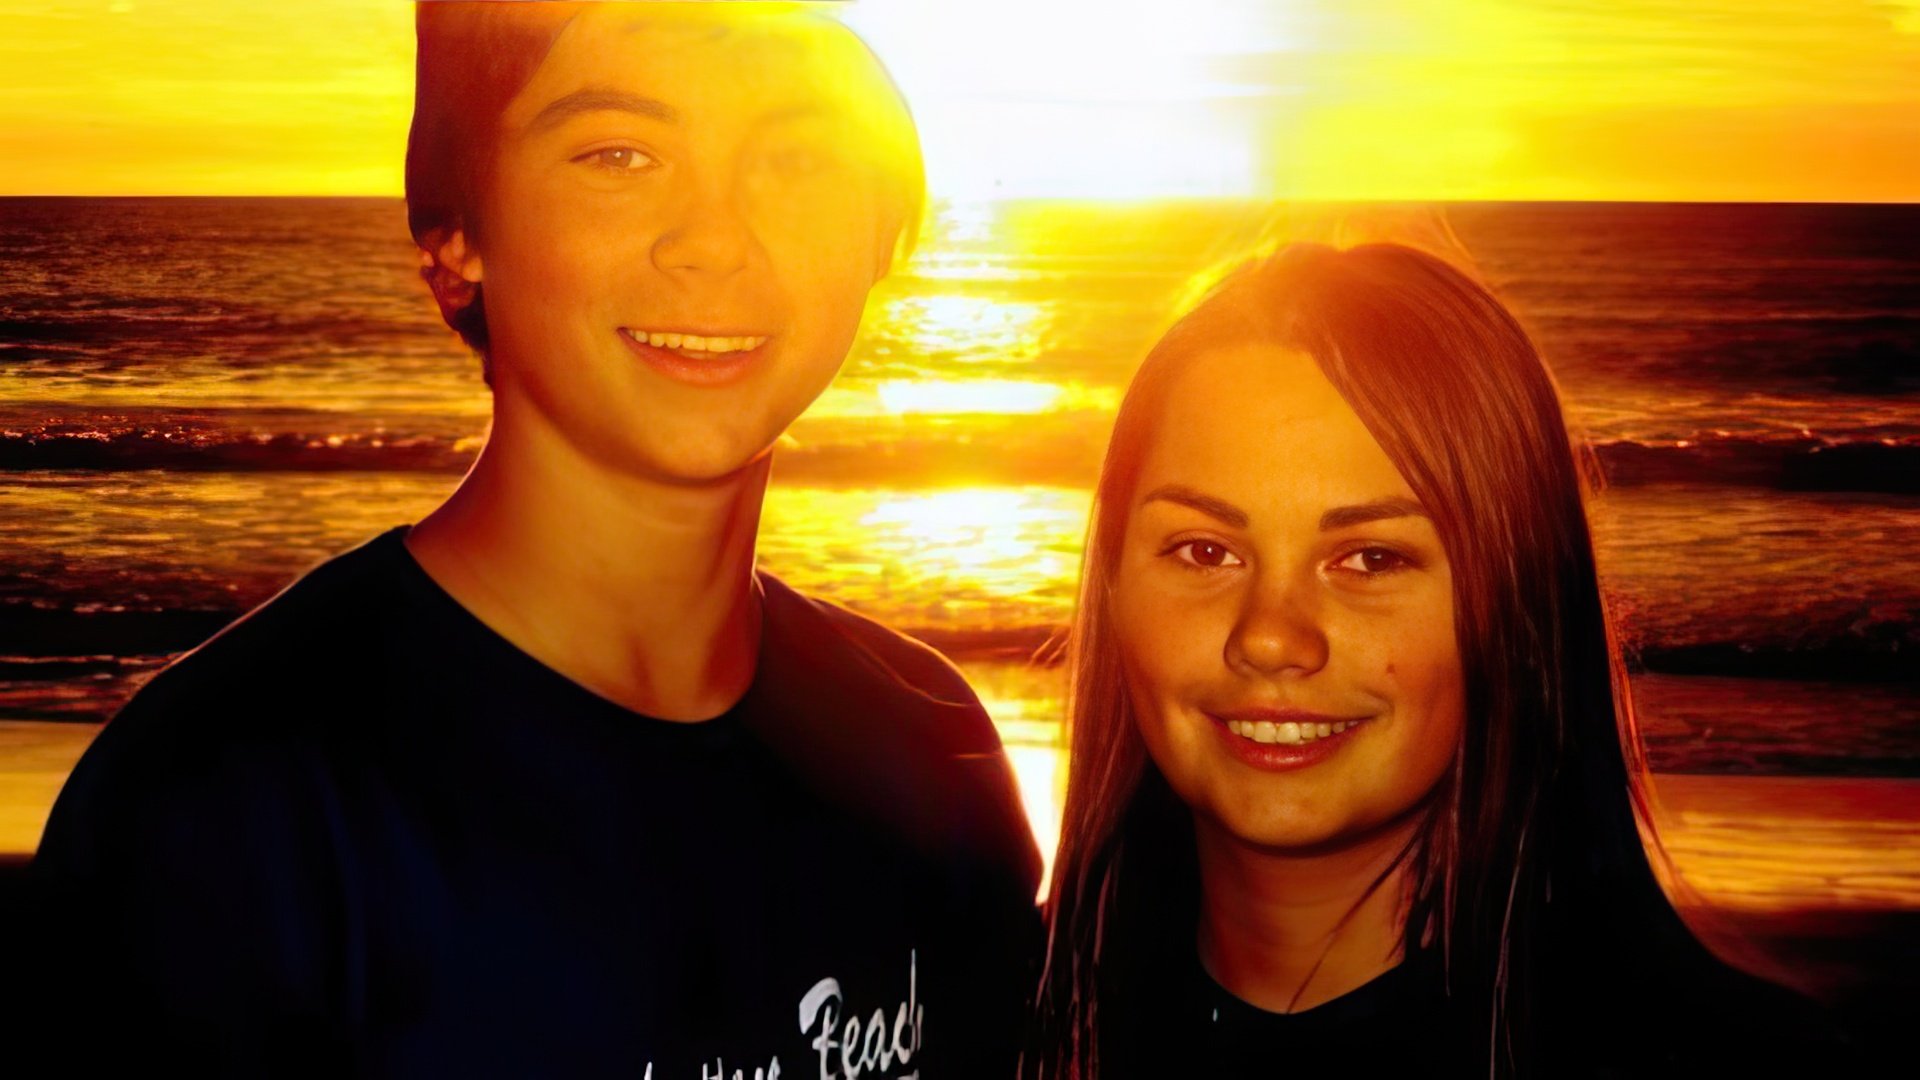 In the photo: Dylan O’Brien’s sister, Julia